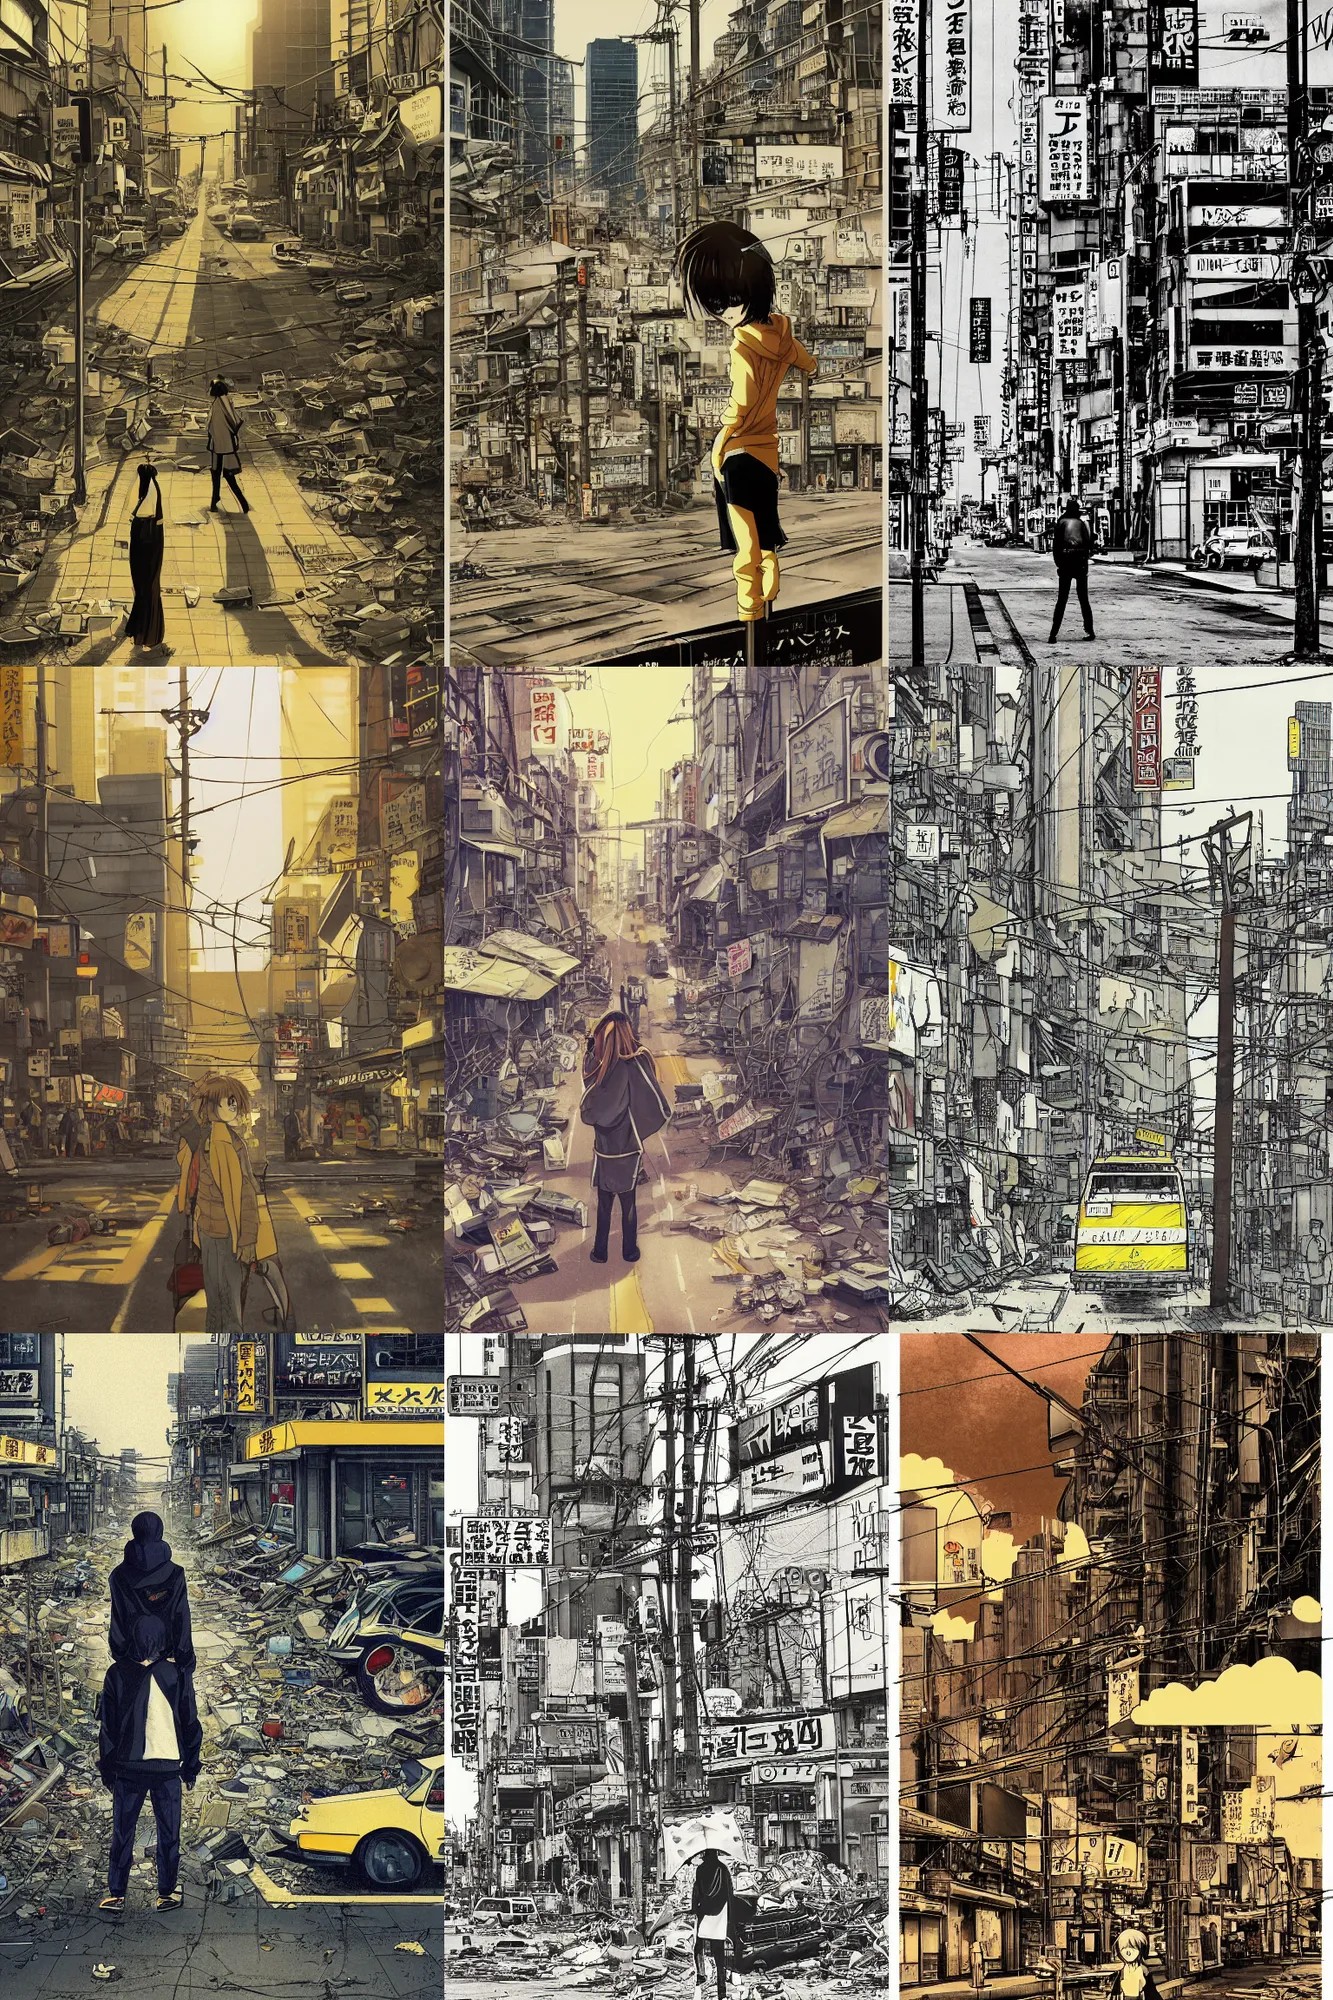 Prompt: anime, tatsuyuki tanaka movie poster, pale yellow sky, crosswalk, shinjuku, koji morimoto, masamune shirow, foggy, colossal robot, bright sun bleached ground, paper texture, distant shot of hoody girl sitting in deserted dusty shinjuku junk town, old pawn shop, tangled overhead wires, telephone pole, dusty, dry, 4k, dynamic camera angle, deep 3 point perspective, fish eye, dynamic scene